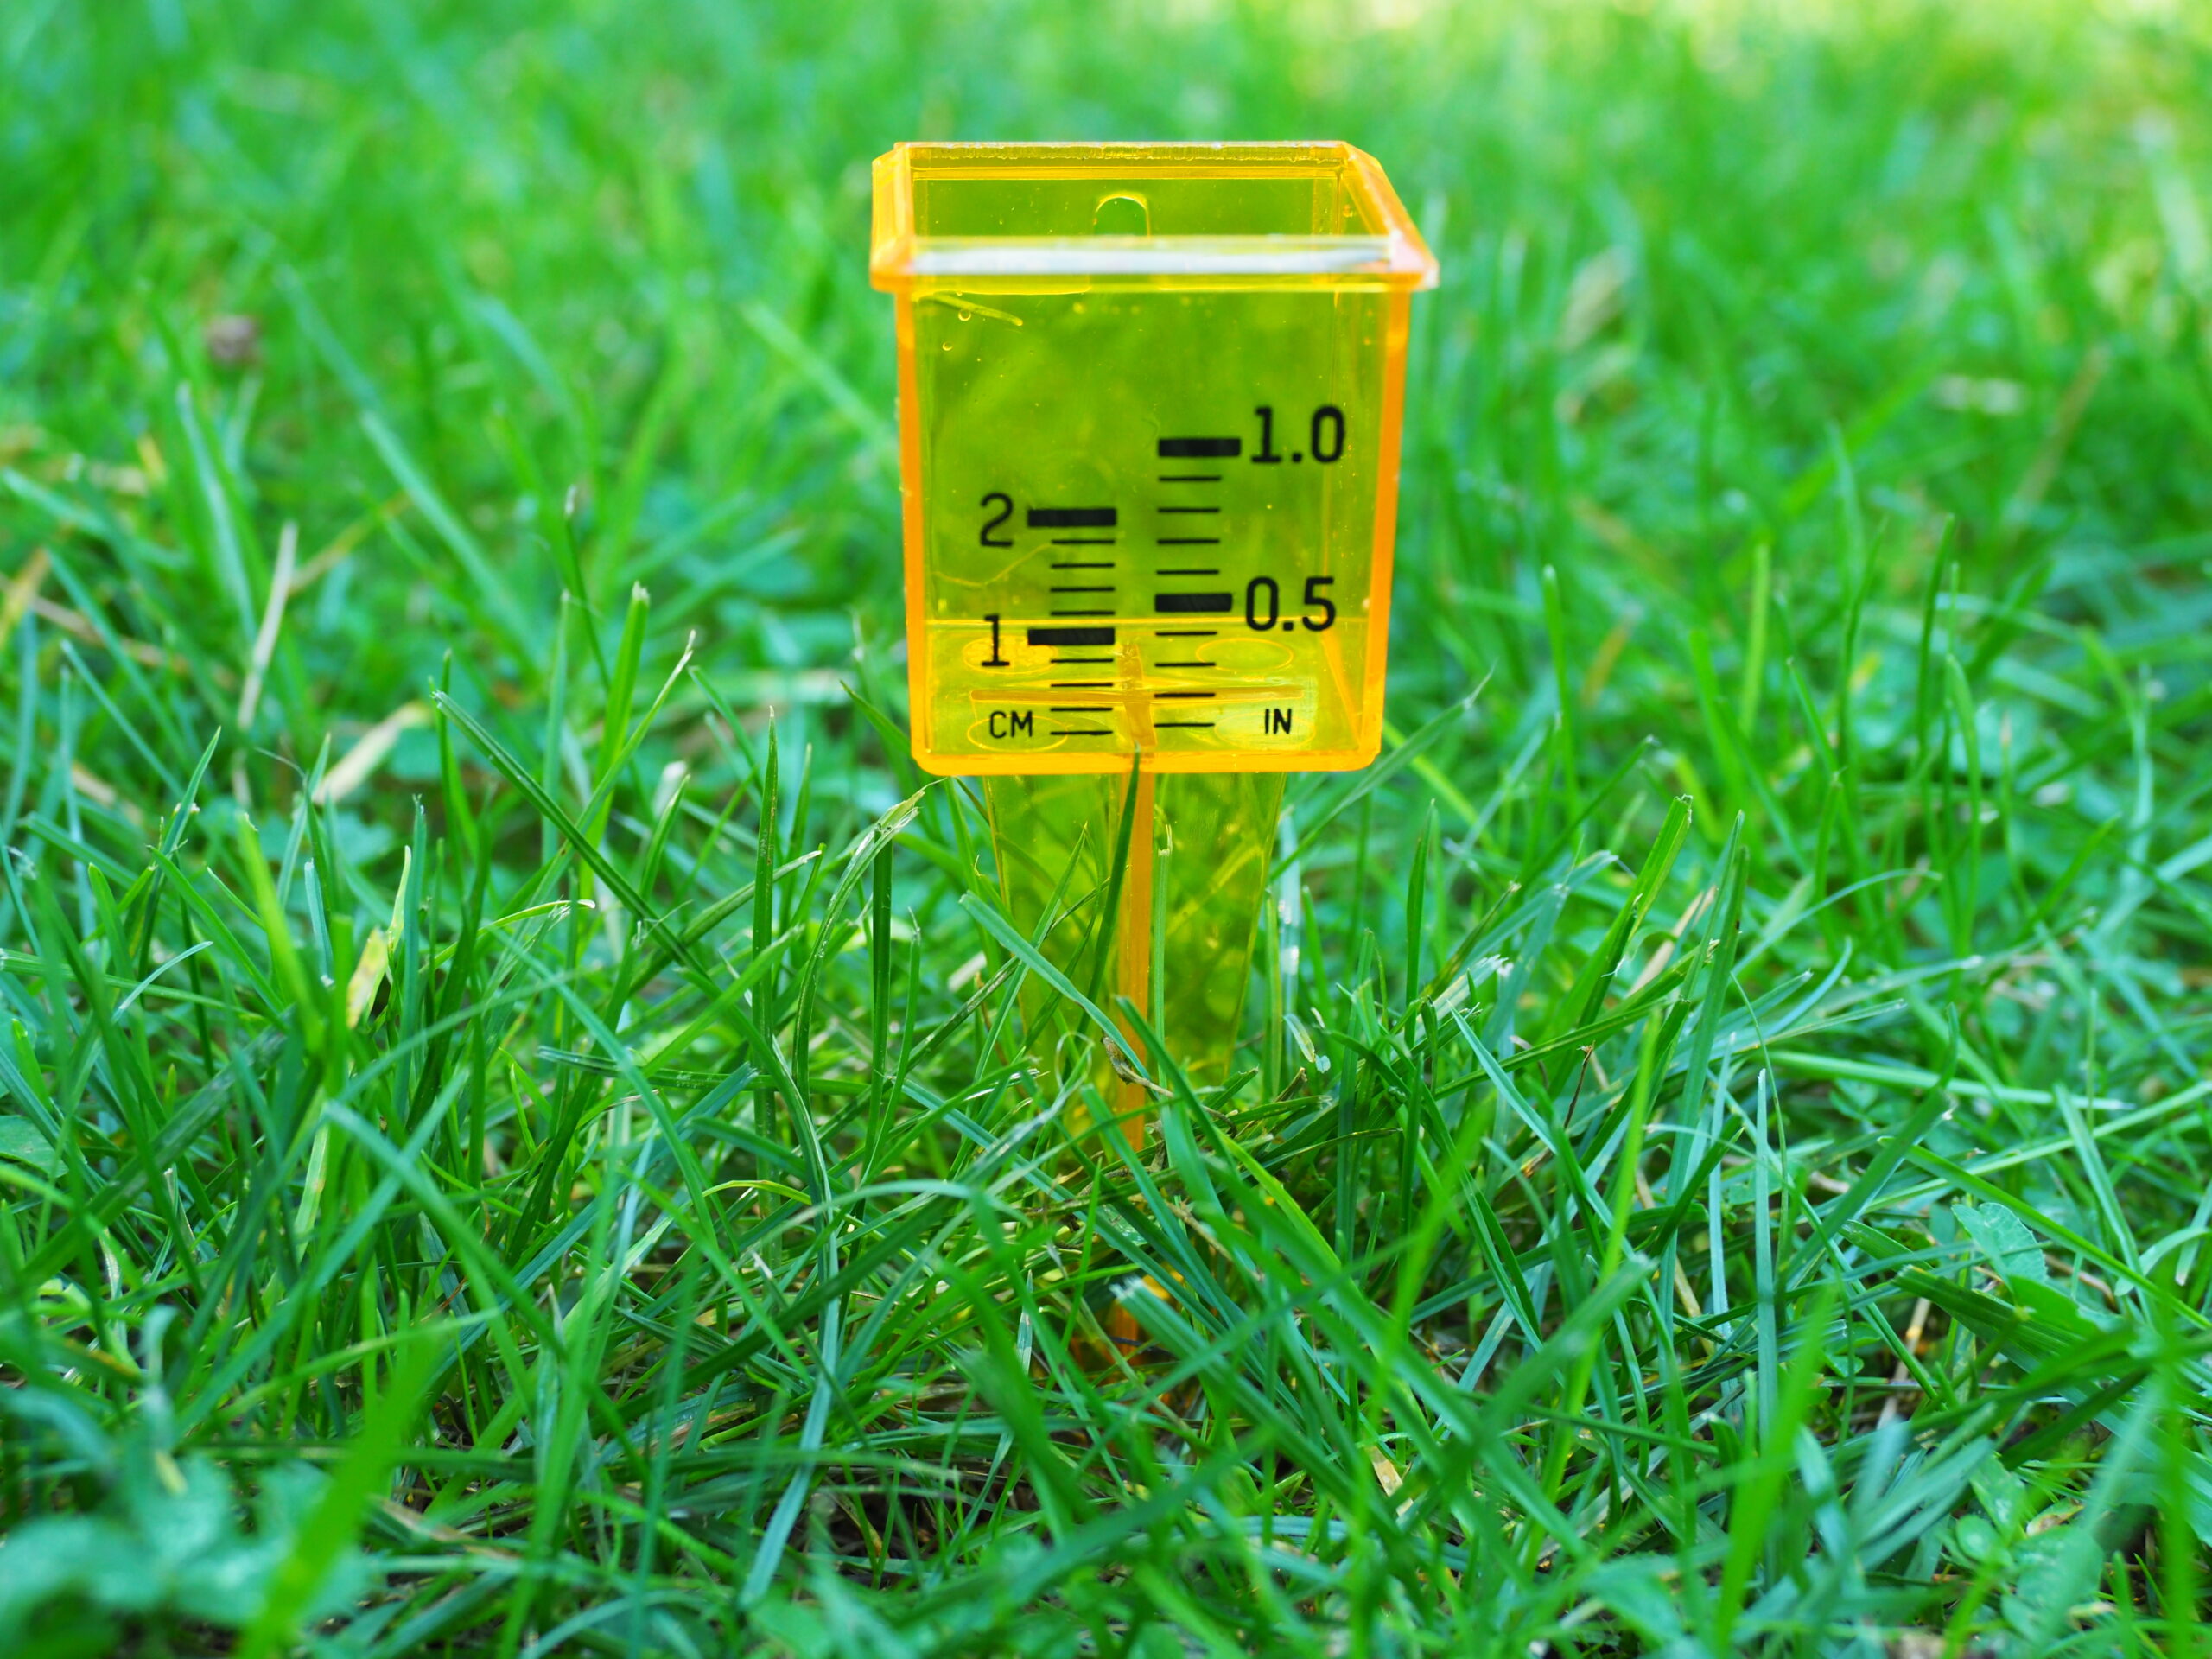 A very simple and cheap plastic water gauge will show you how much it’s rained or how much water a sprinkler is putting out.  Remember to empty it or your observations will be skewed.
ANDREW MESSINGER